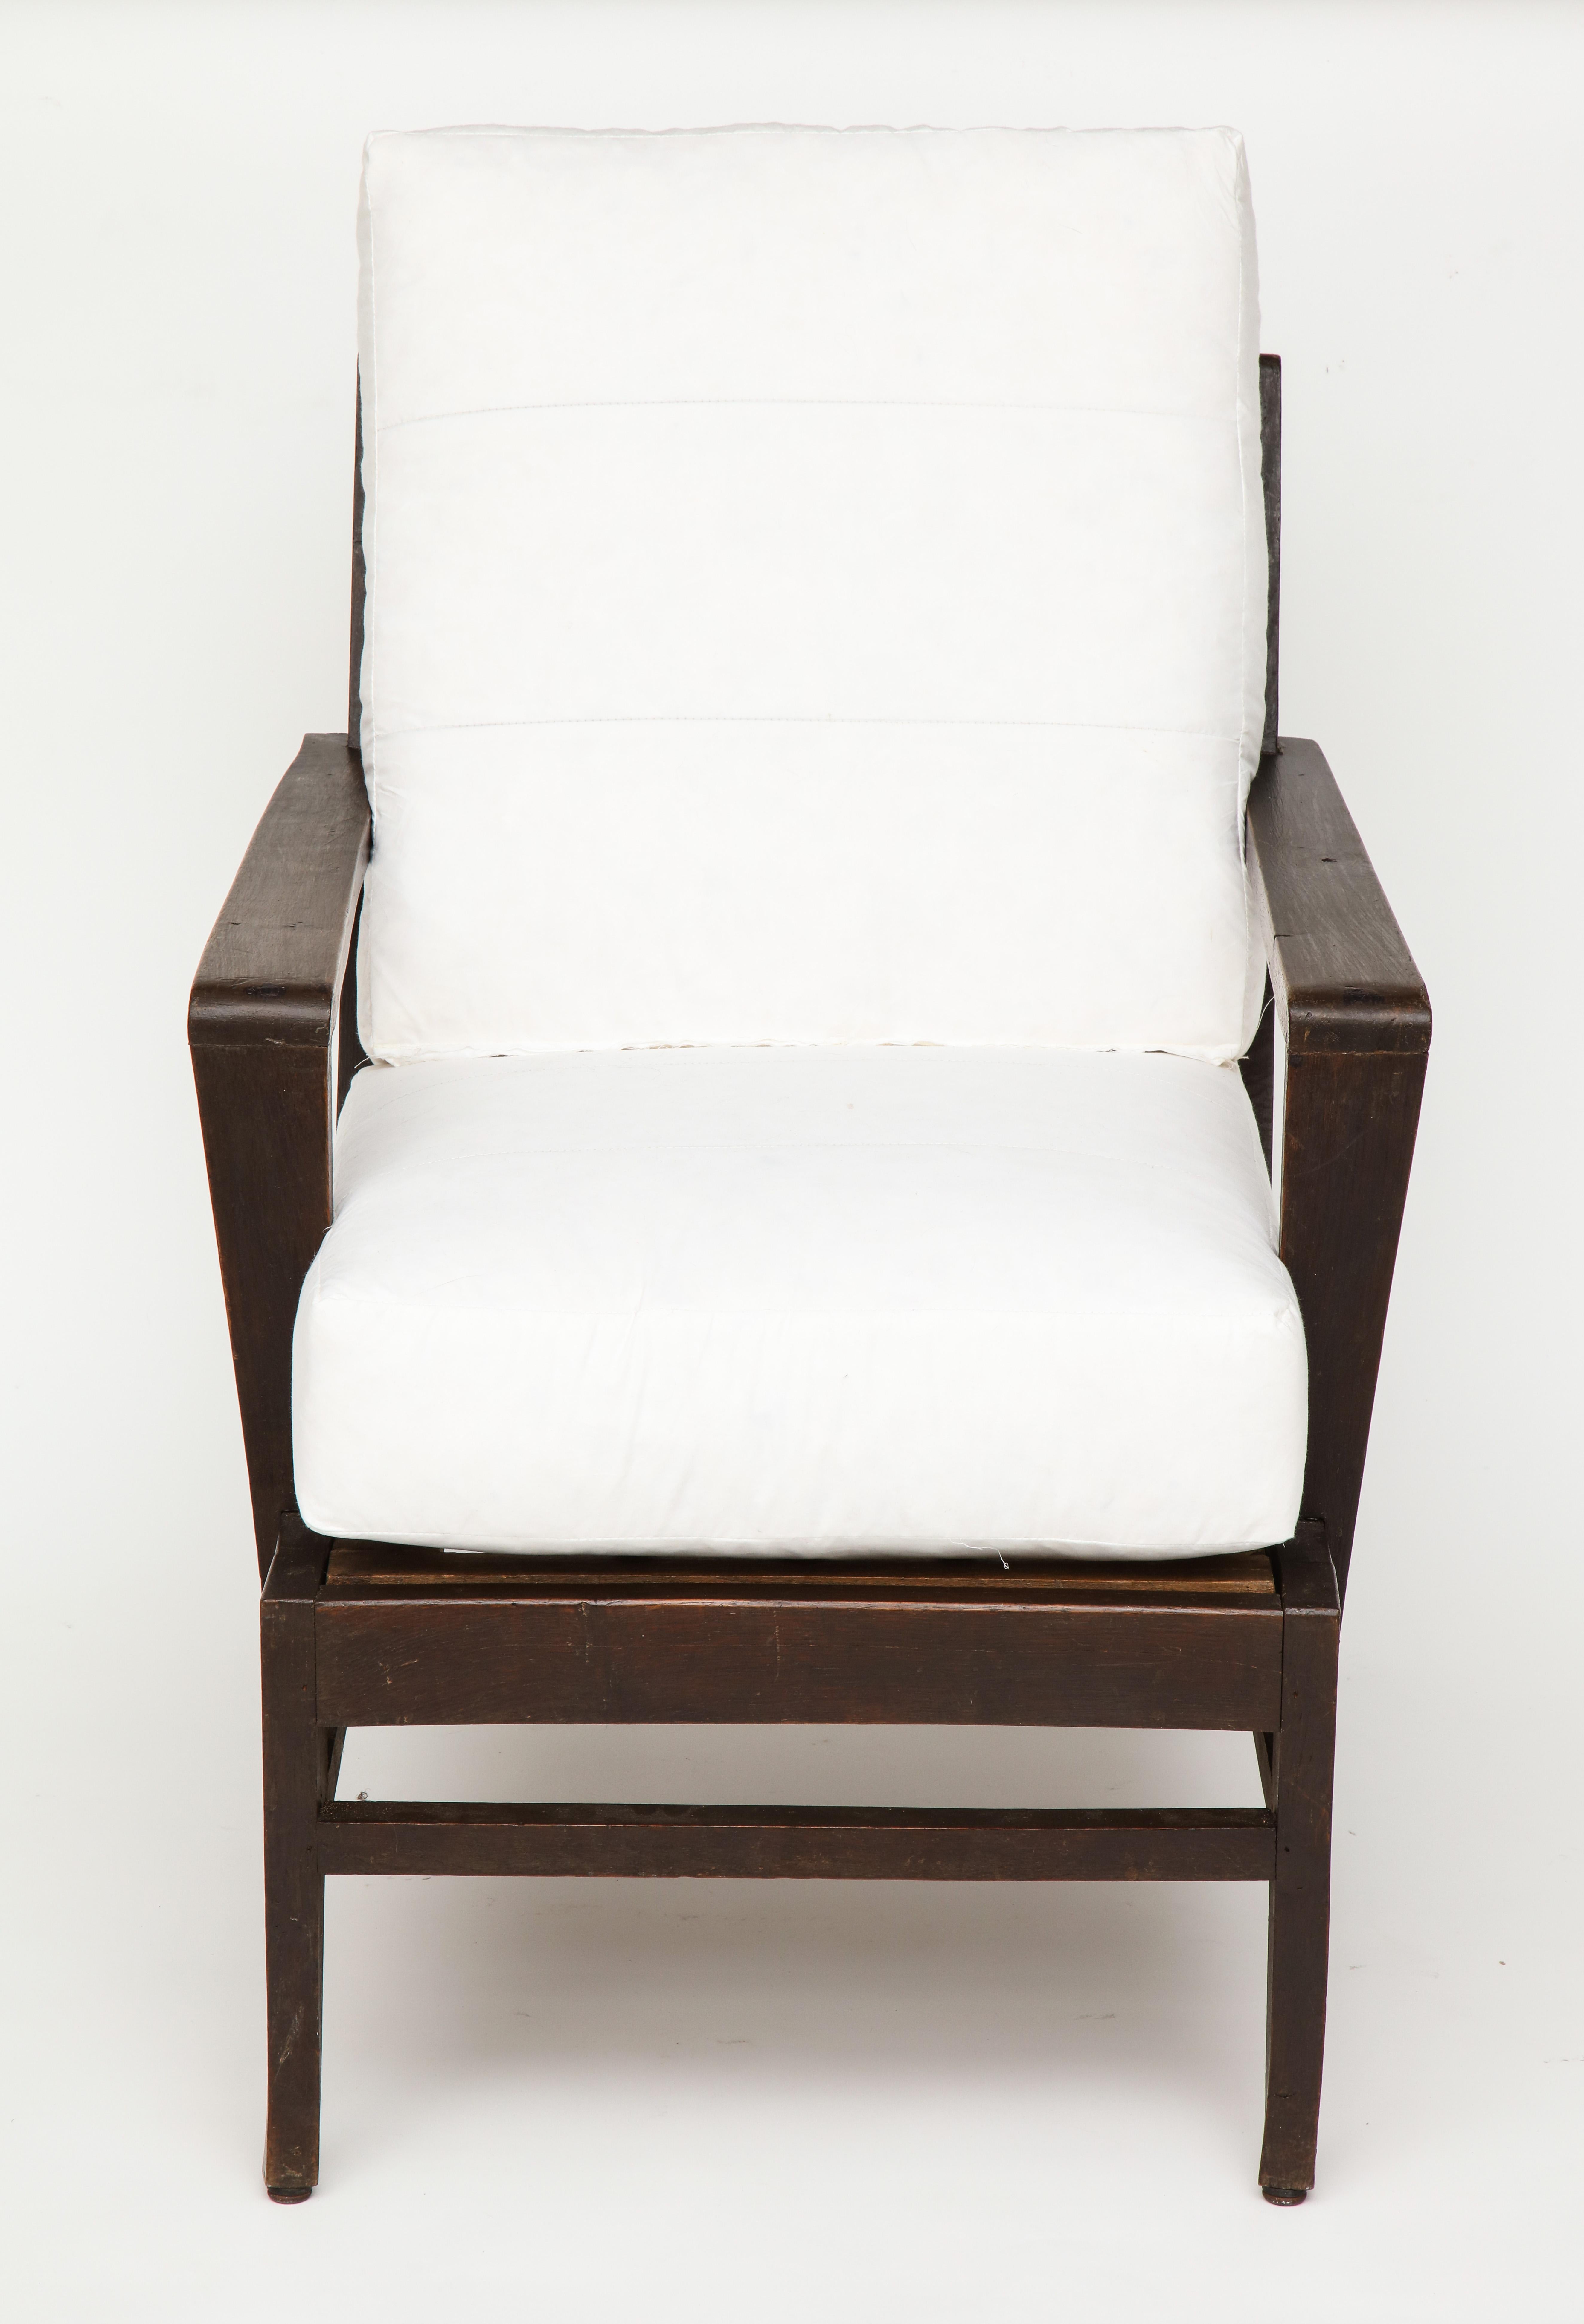 wooden chair with white cushion